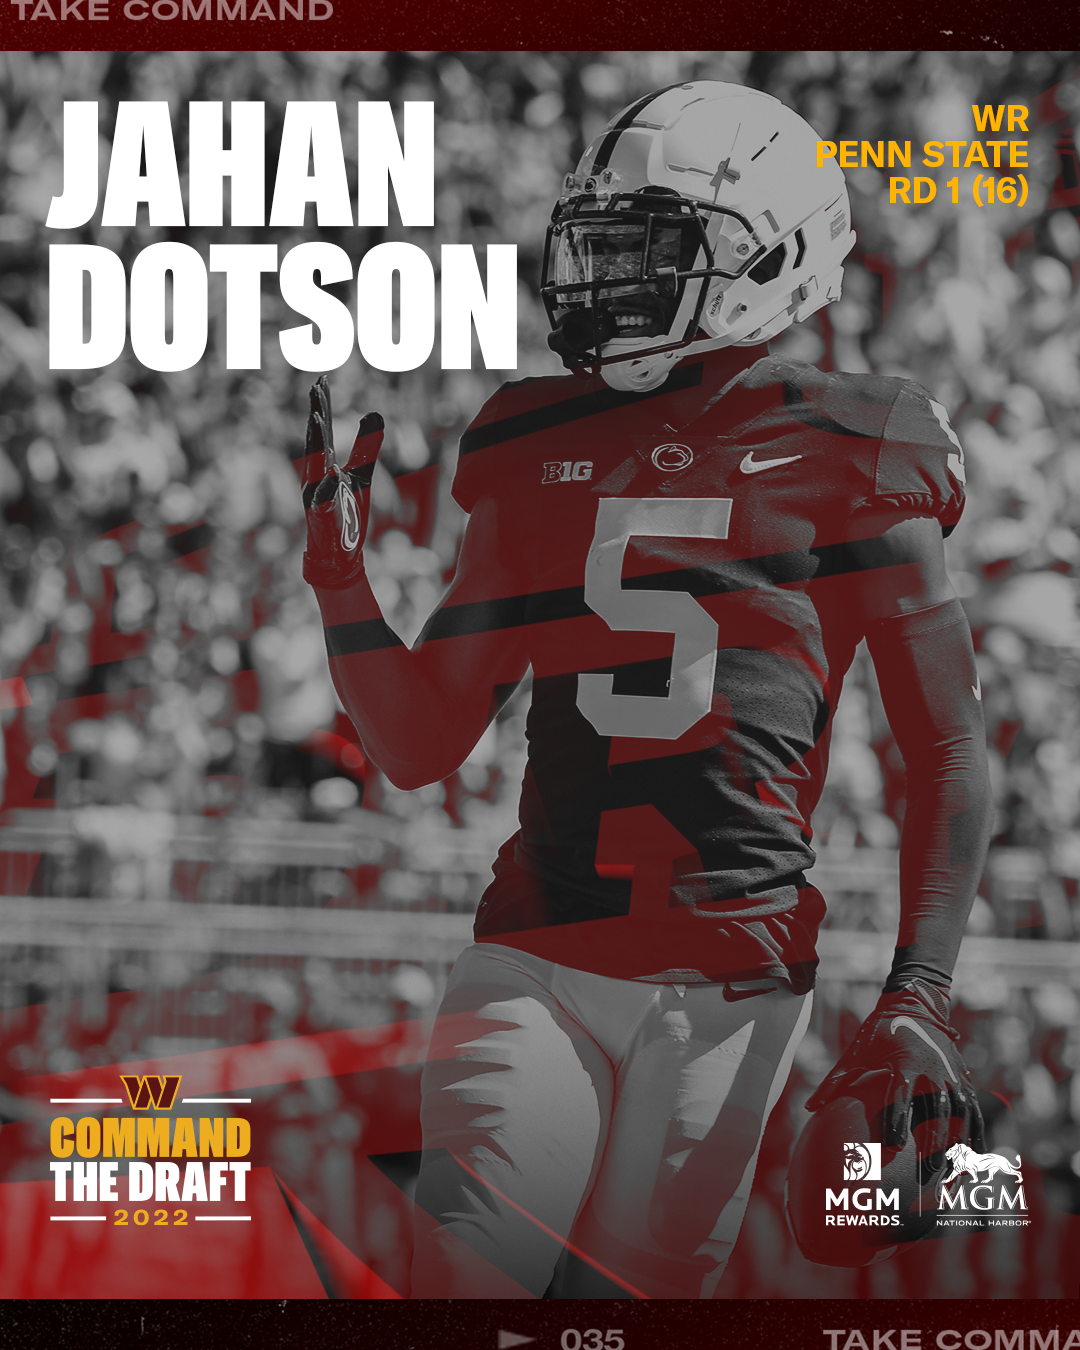 NFL Draft results 2022: Washington Commanders select WR Jahan Dotson with  No. 16 overall pick - DraftKings Network